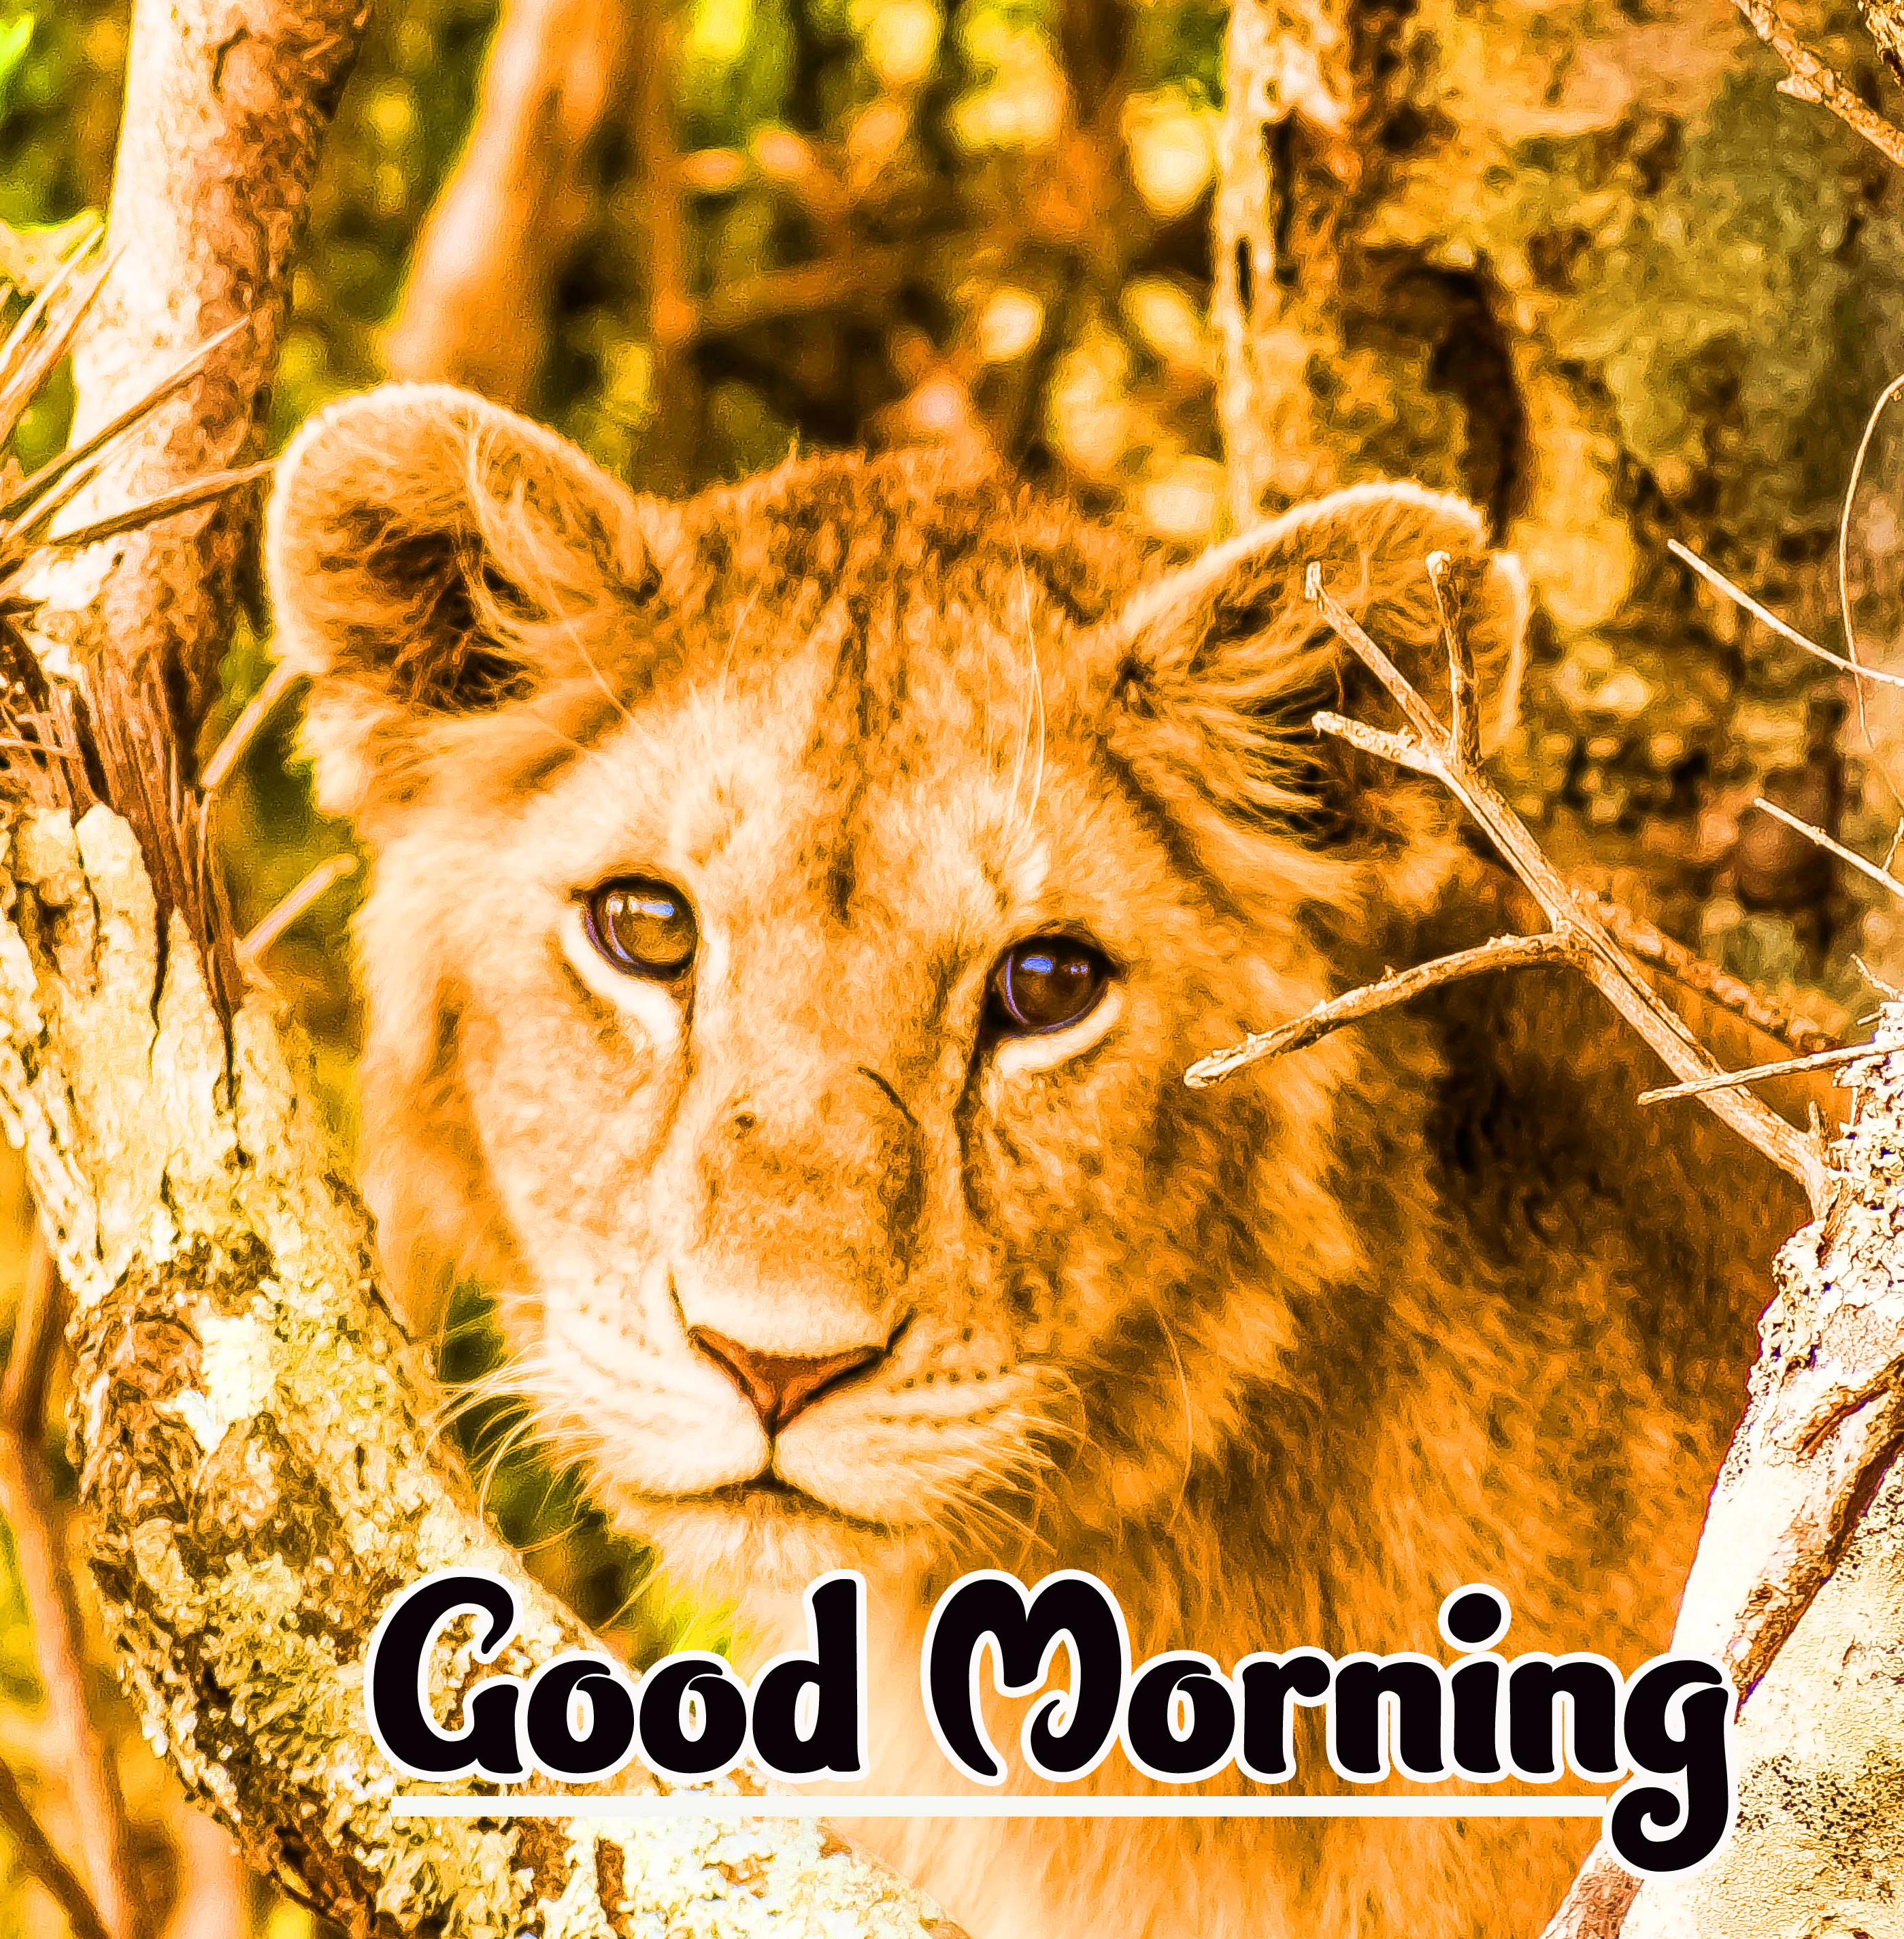 Animal Good morning Wishes Images Pics Wallpaper HD Download 